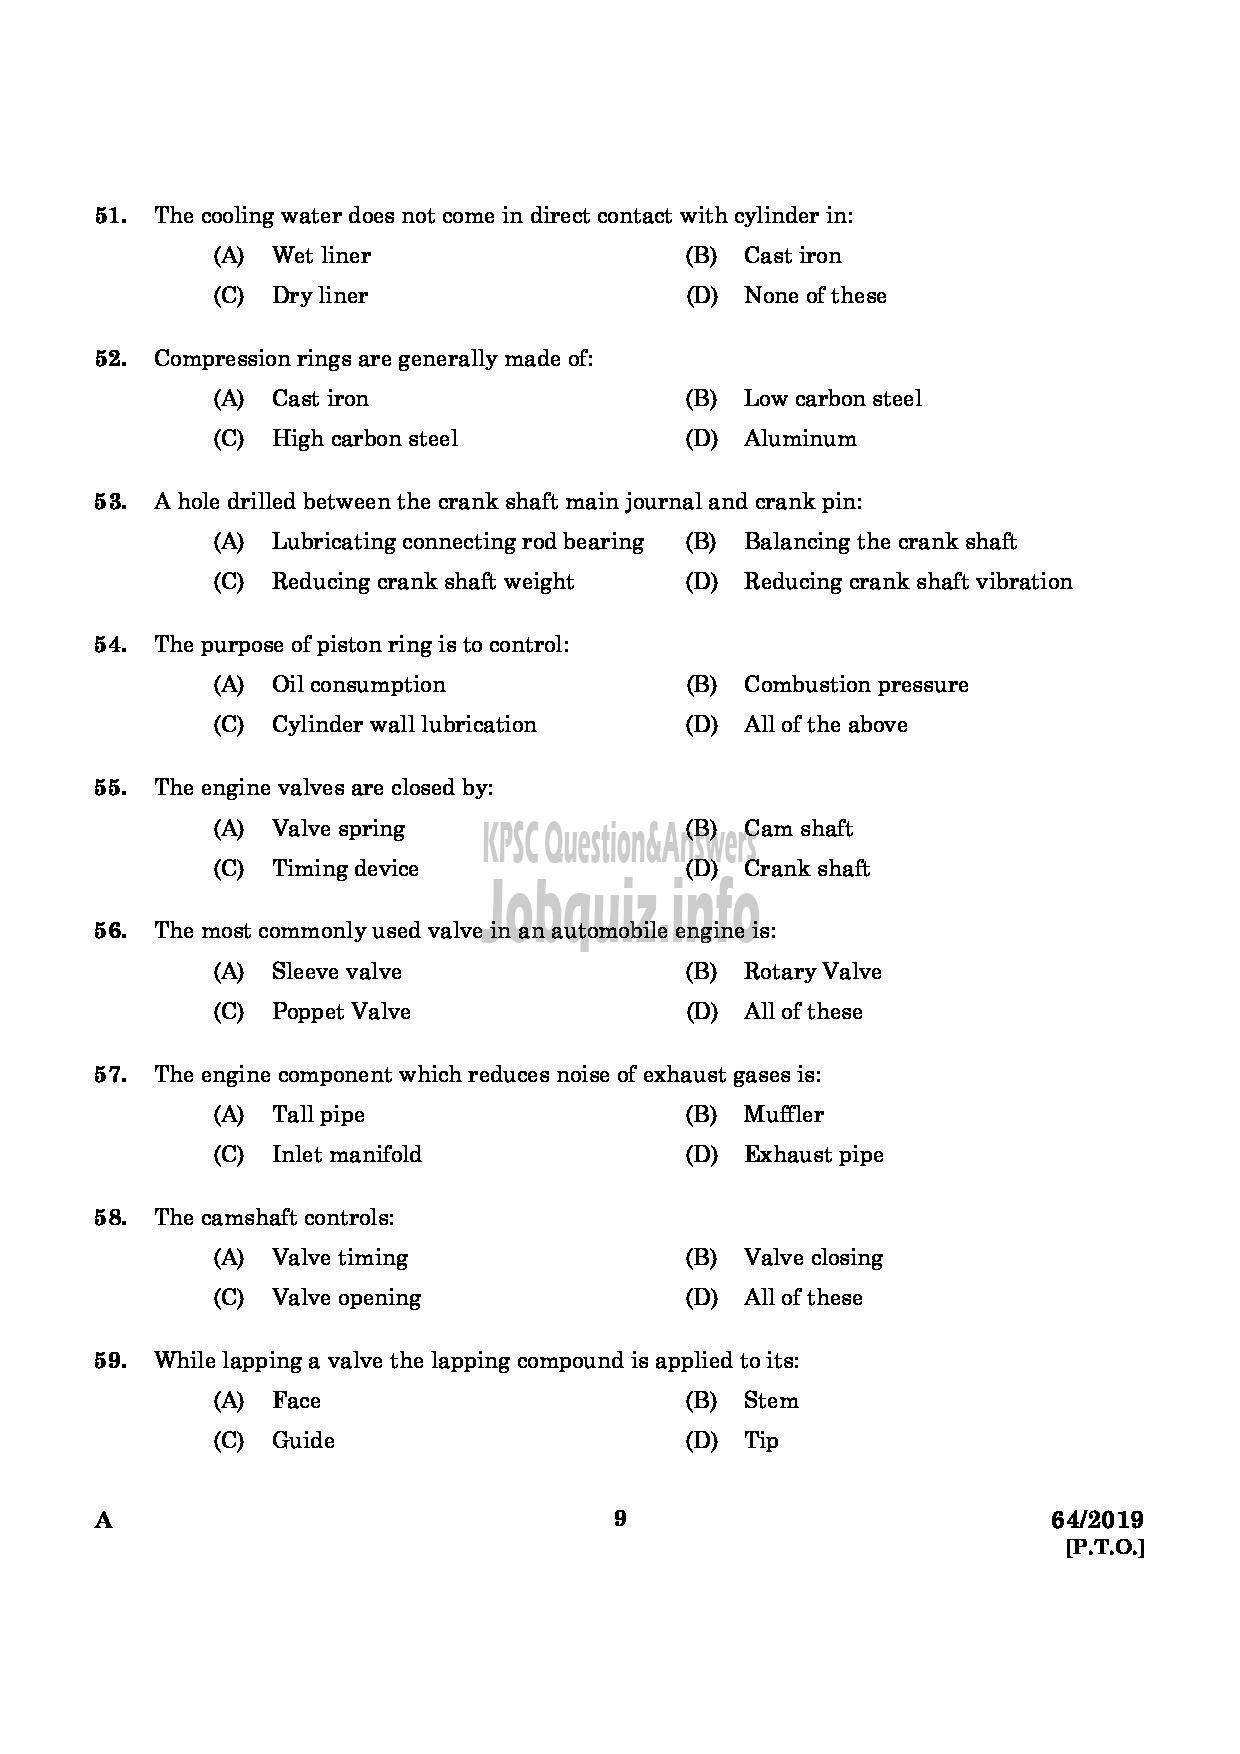 Kerala PSC Question Paper - DRILLING ASSISTANT GROUND WATER DEPARTMENT English -7